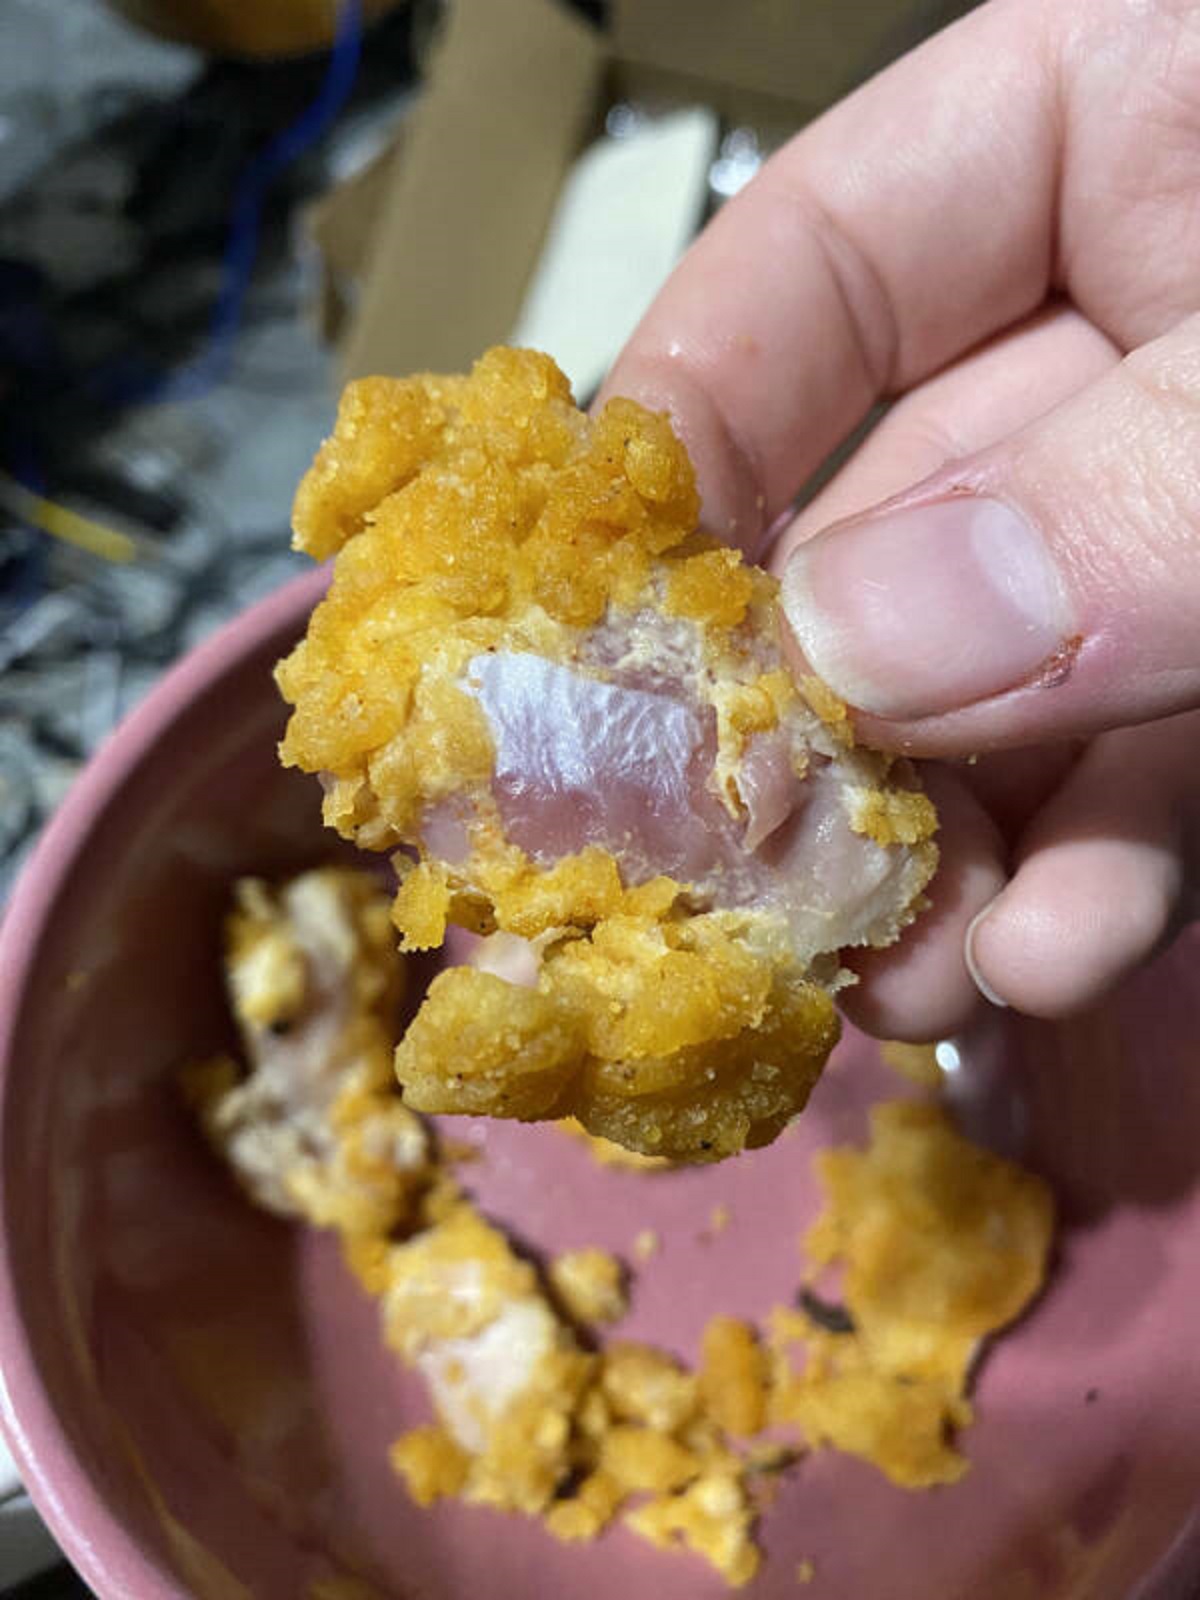 “Just finished a big bowl of popcorn chicken and thought a few pieces had a weird texture.”